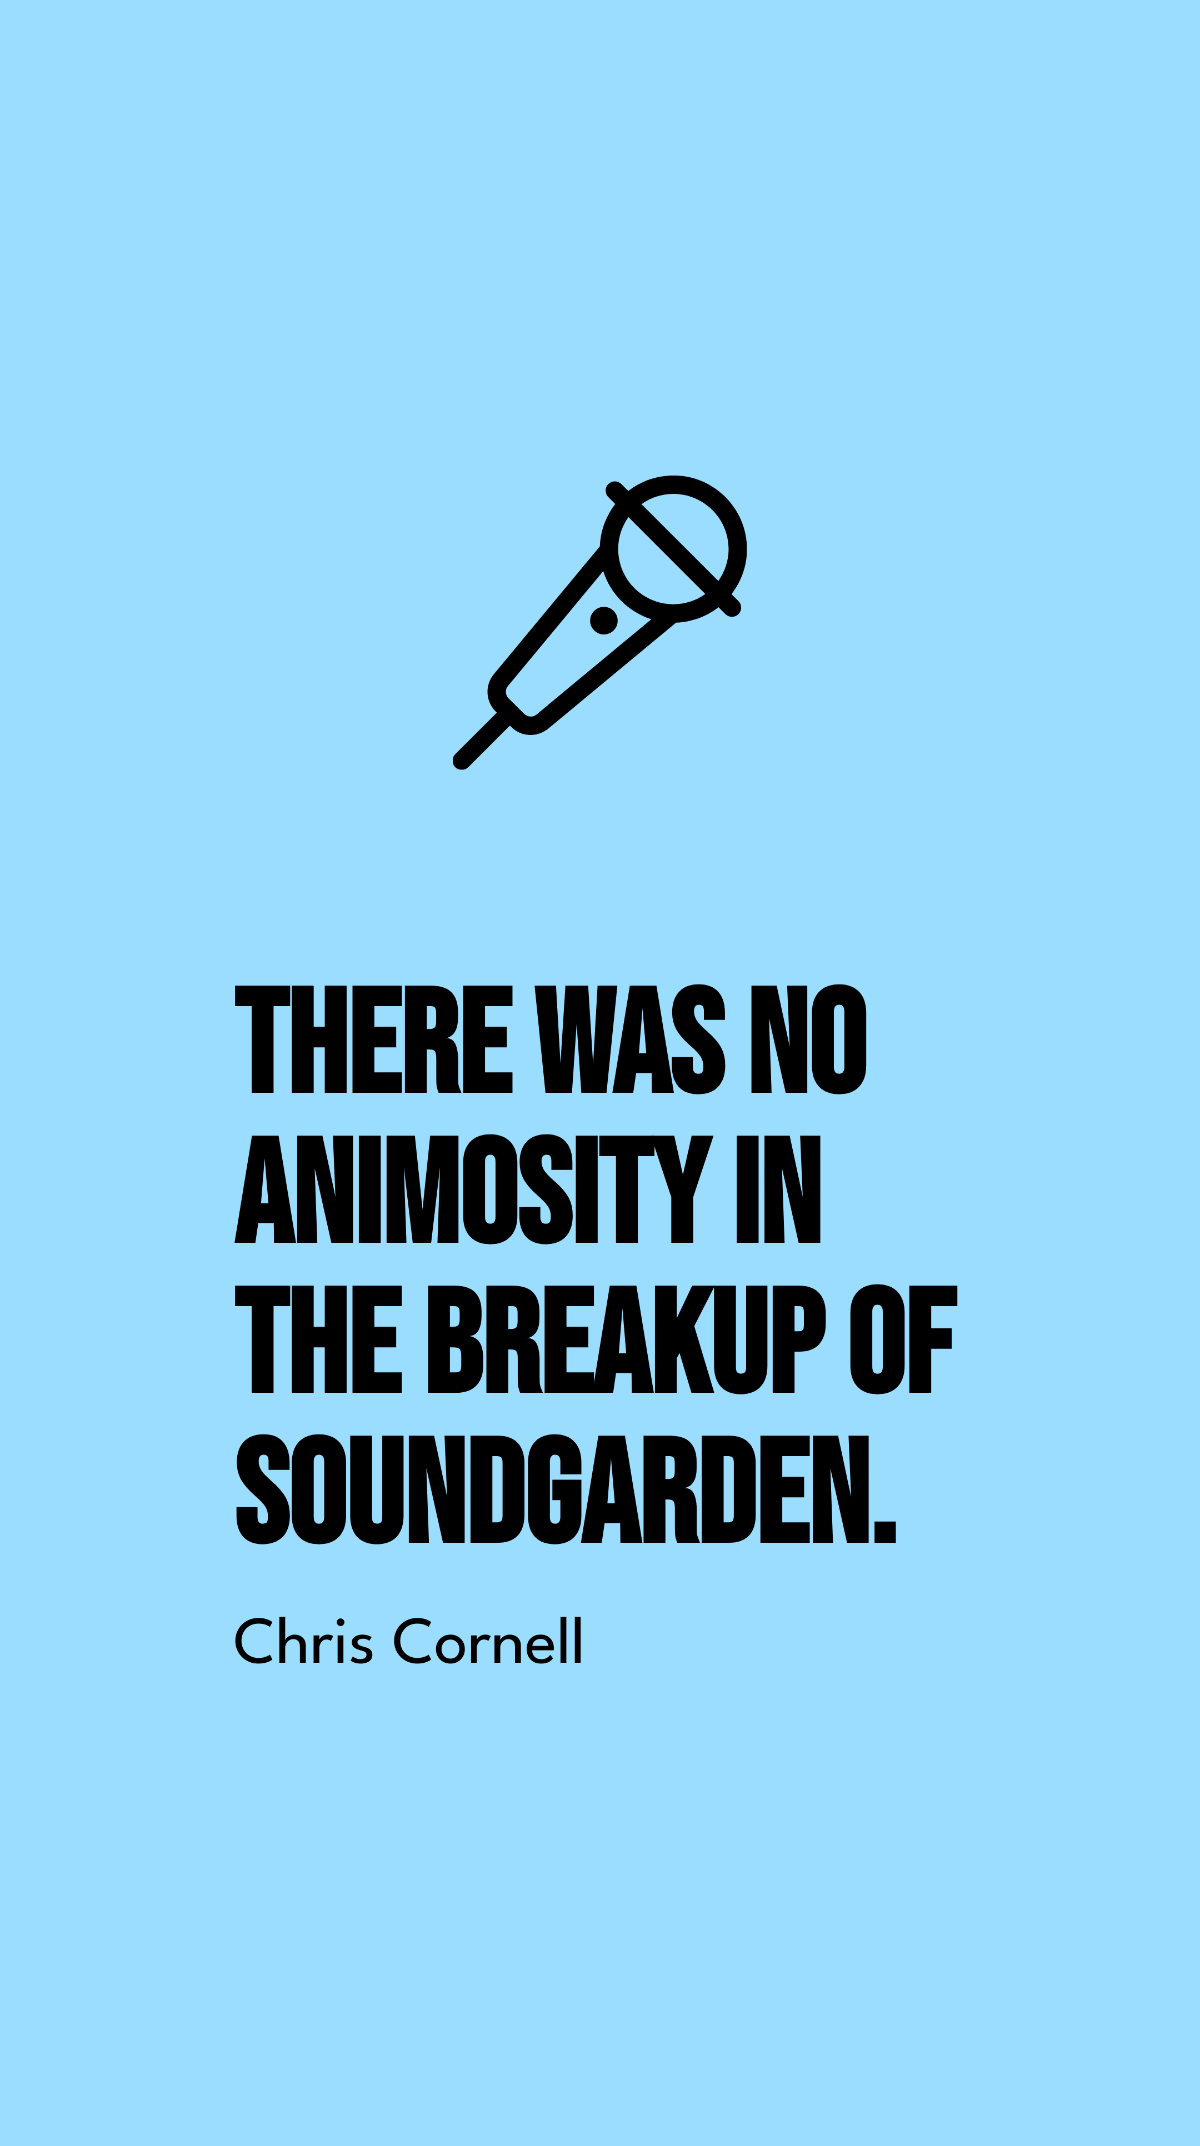 Free Chris Cornell - There was no animosity in the breakup of Soundgarden. Template